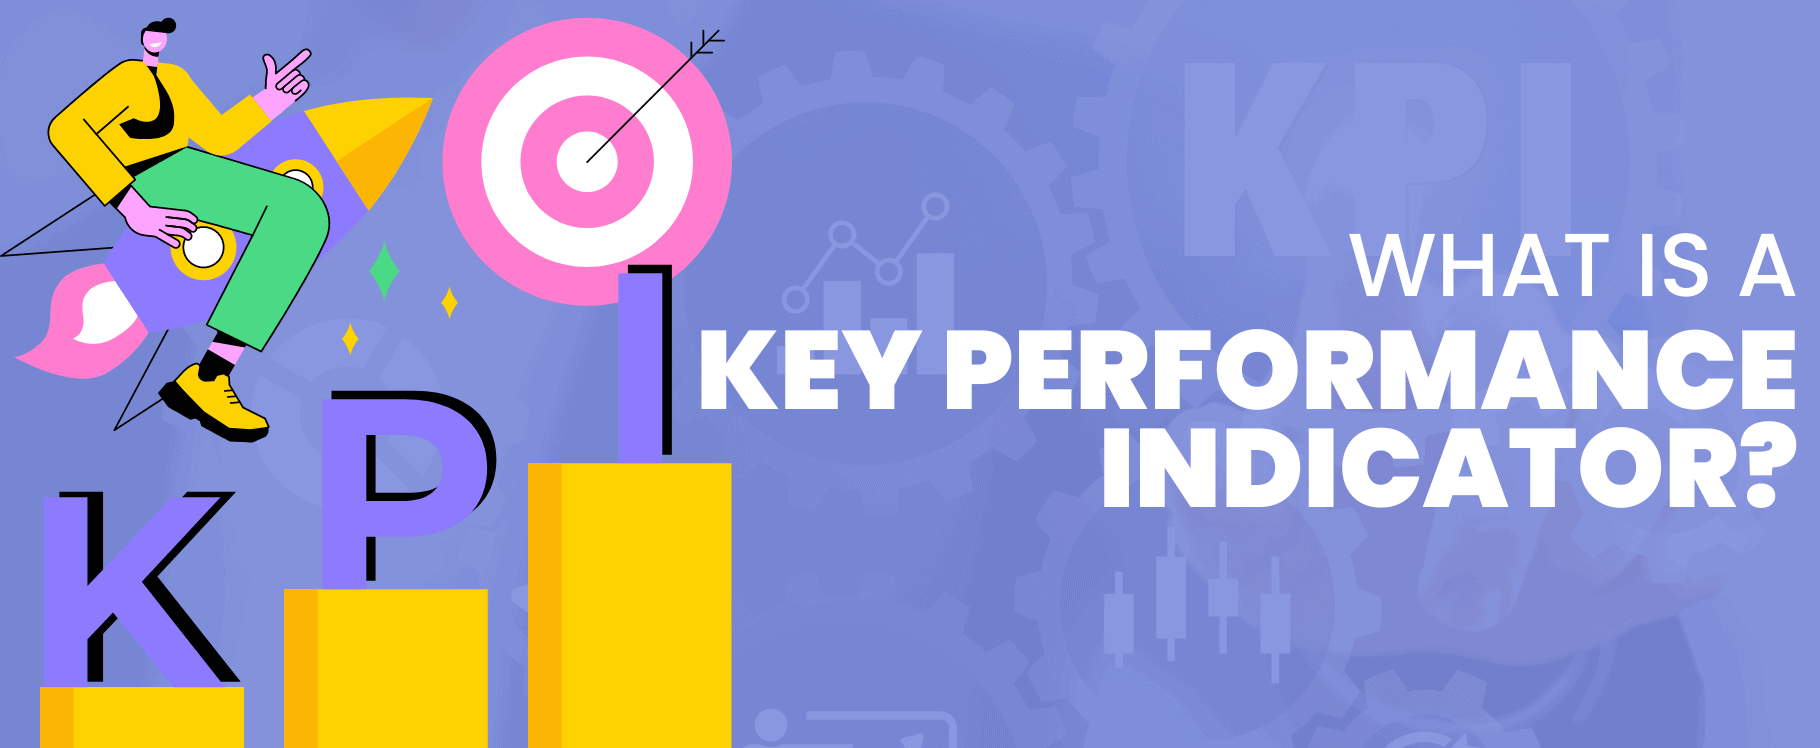 what is a key performance indicator